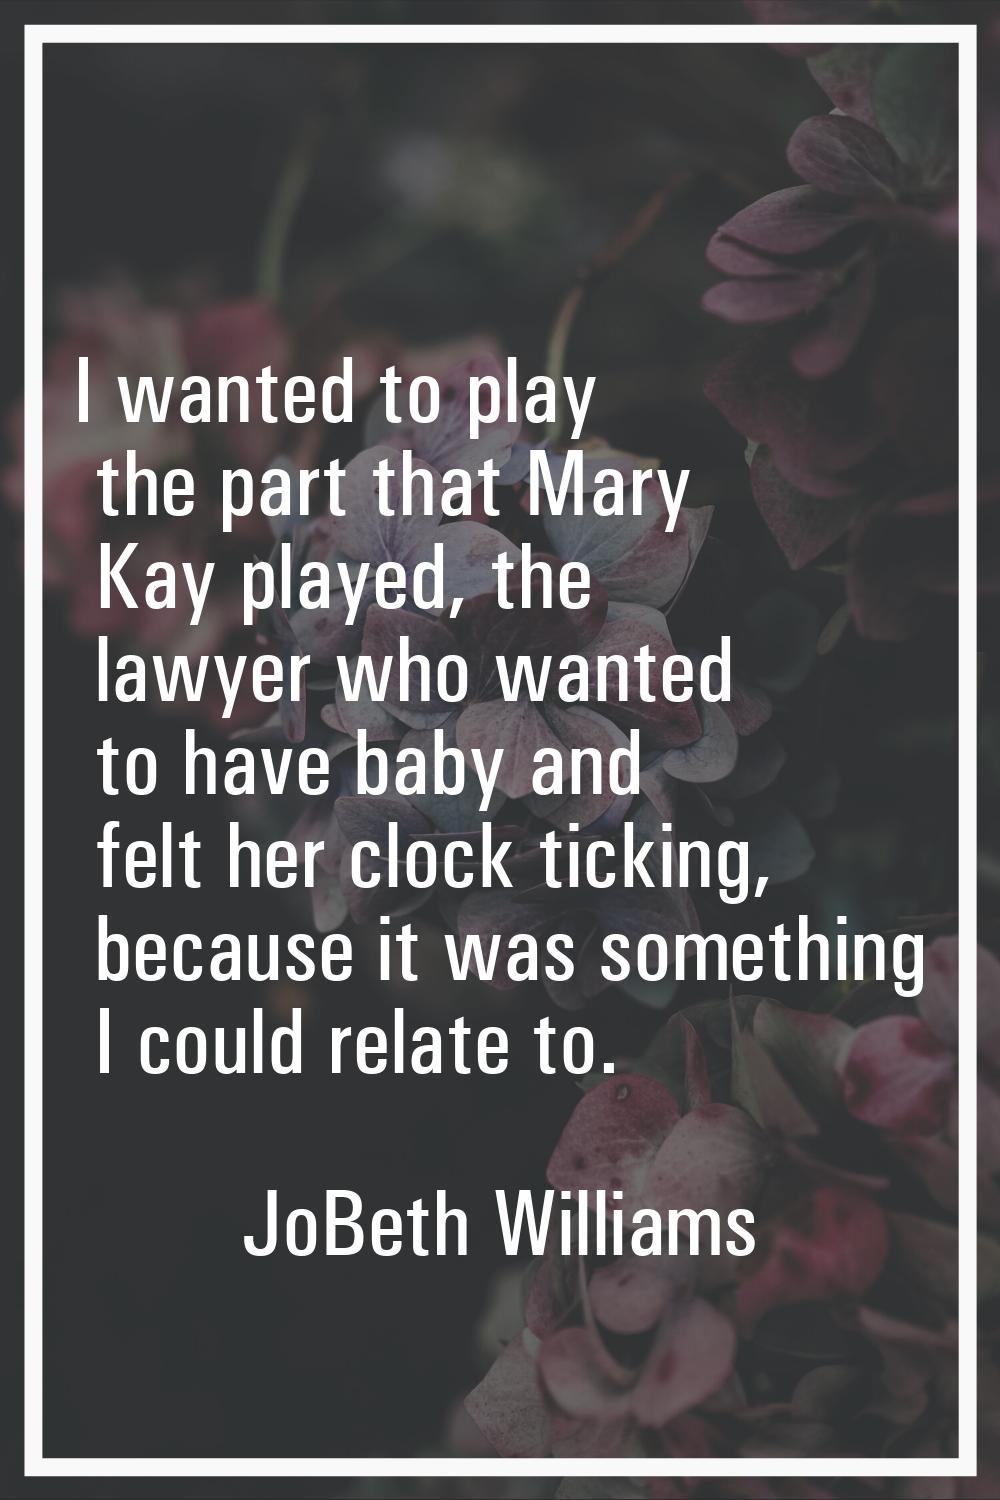 I wanted to play the part that Mary Kay played, the lawyer who wanted to have baby and felt her clo